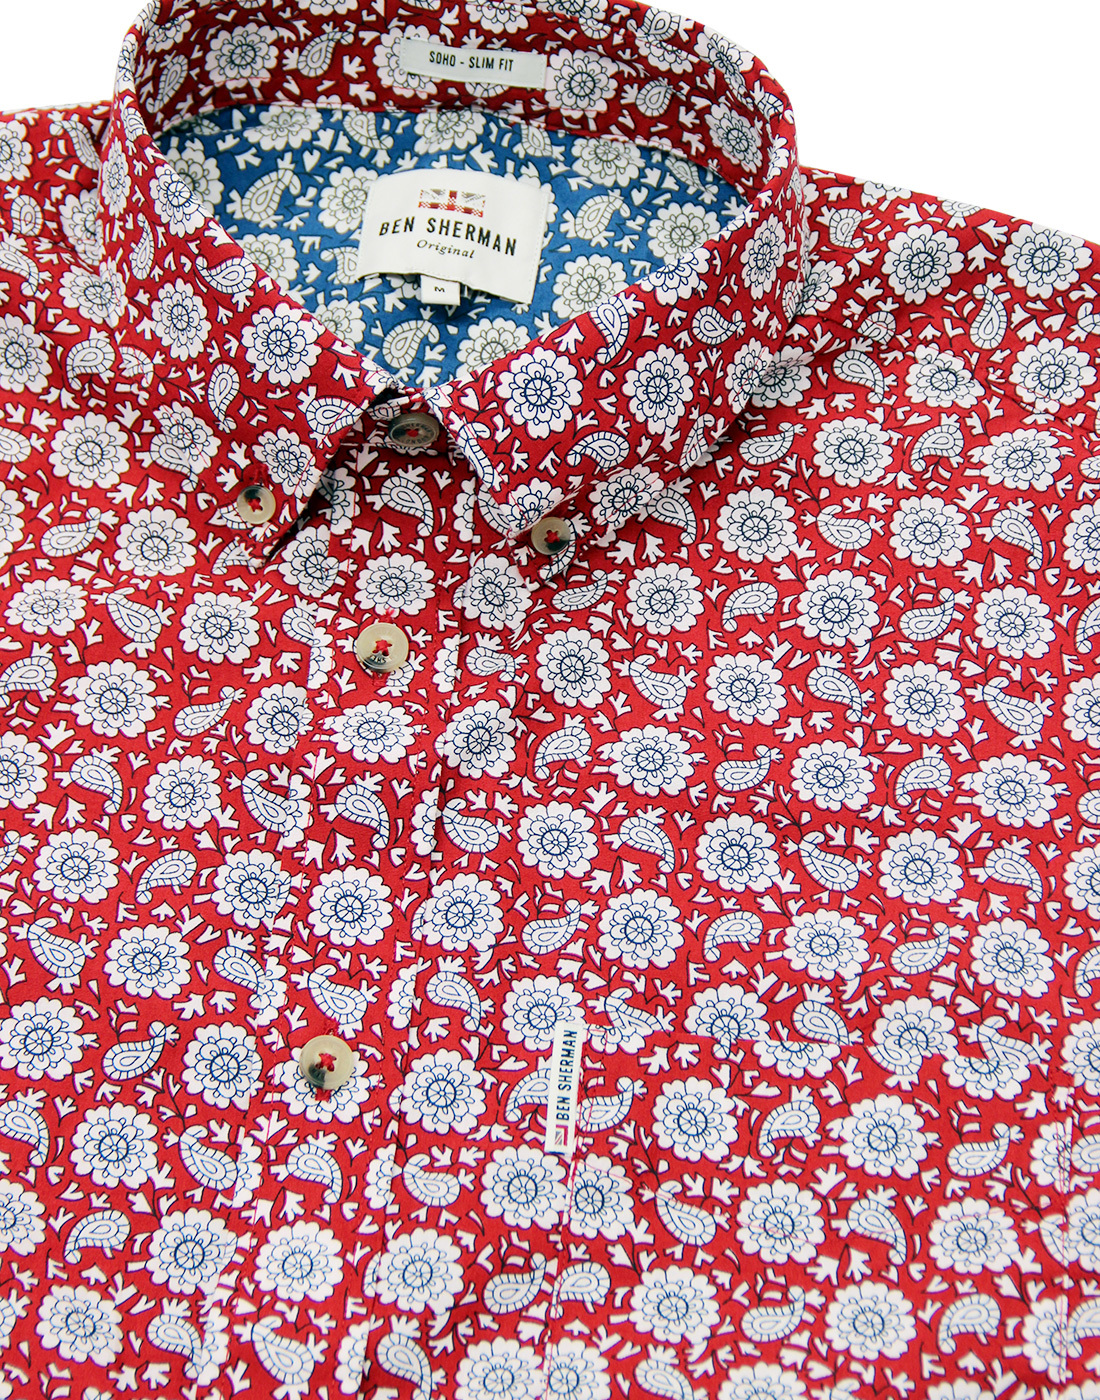 BEN SHERMAN Mens 1960s Mod Floral Paisley S/S Shirt in Red